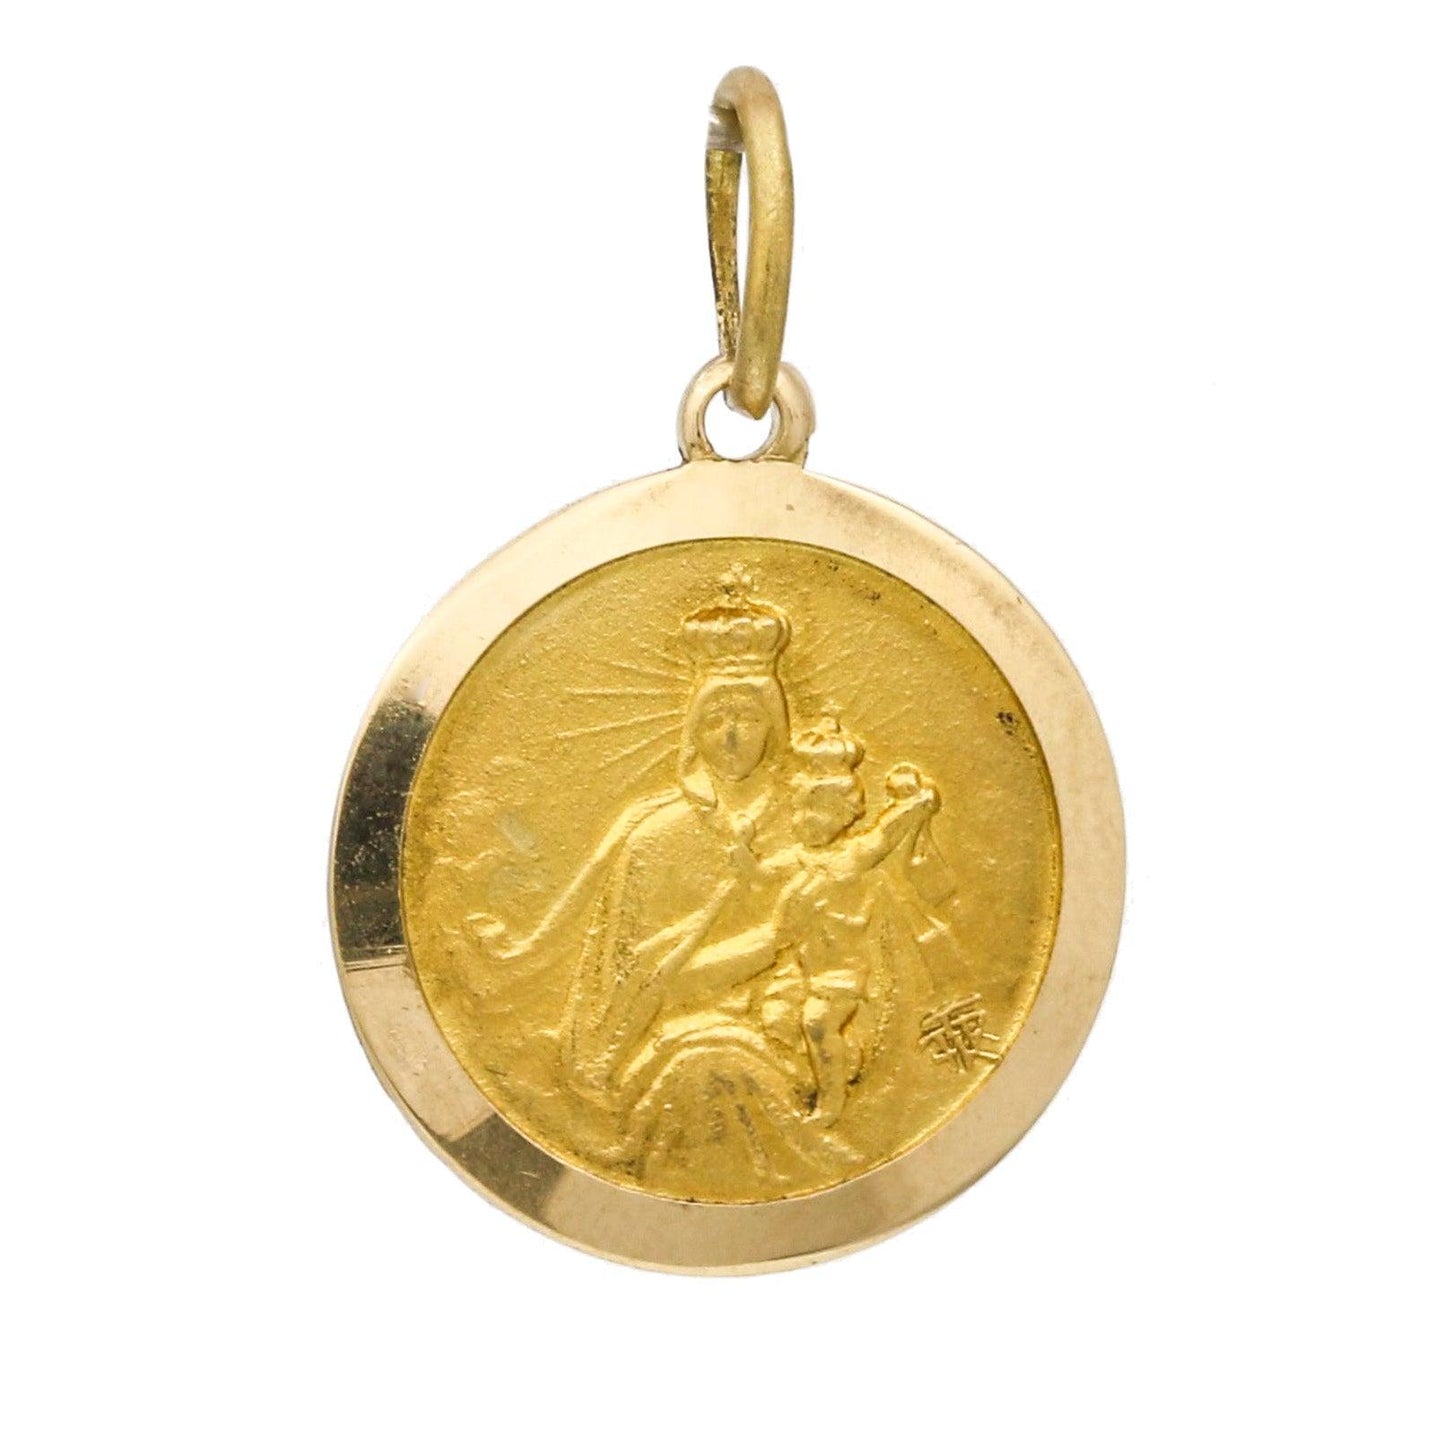 Virgin Mary and Jesus Madonna Medallion Charm Pendant in 18k Yellow Gold - 31 Jewels Inc.